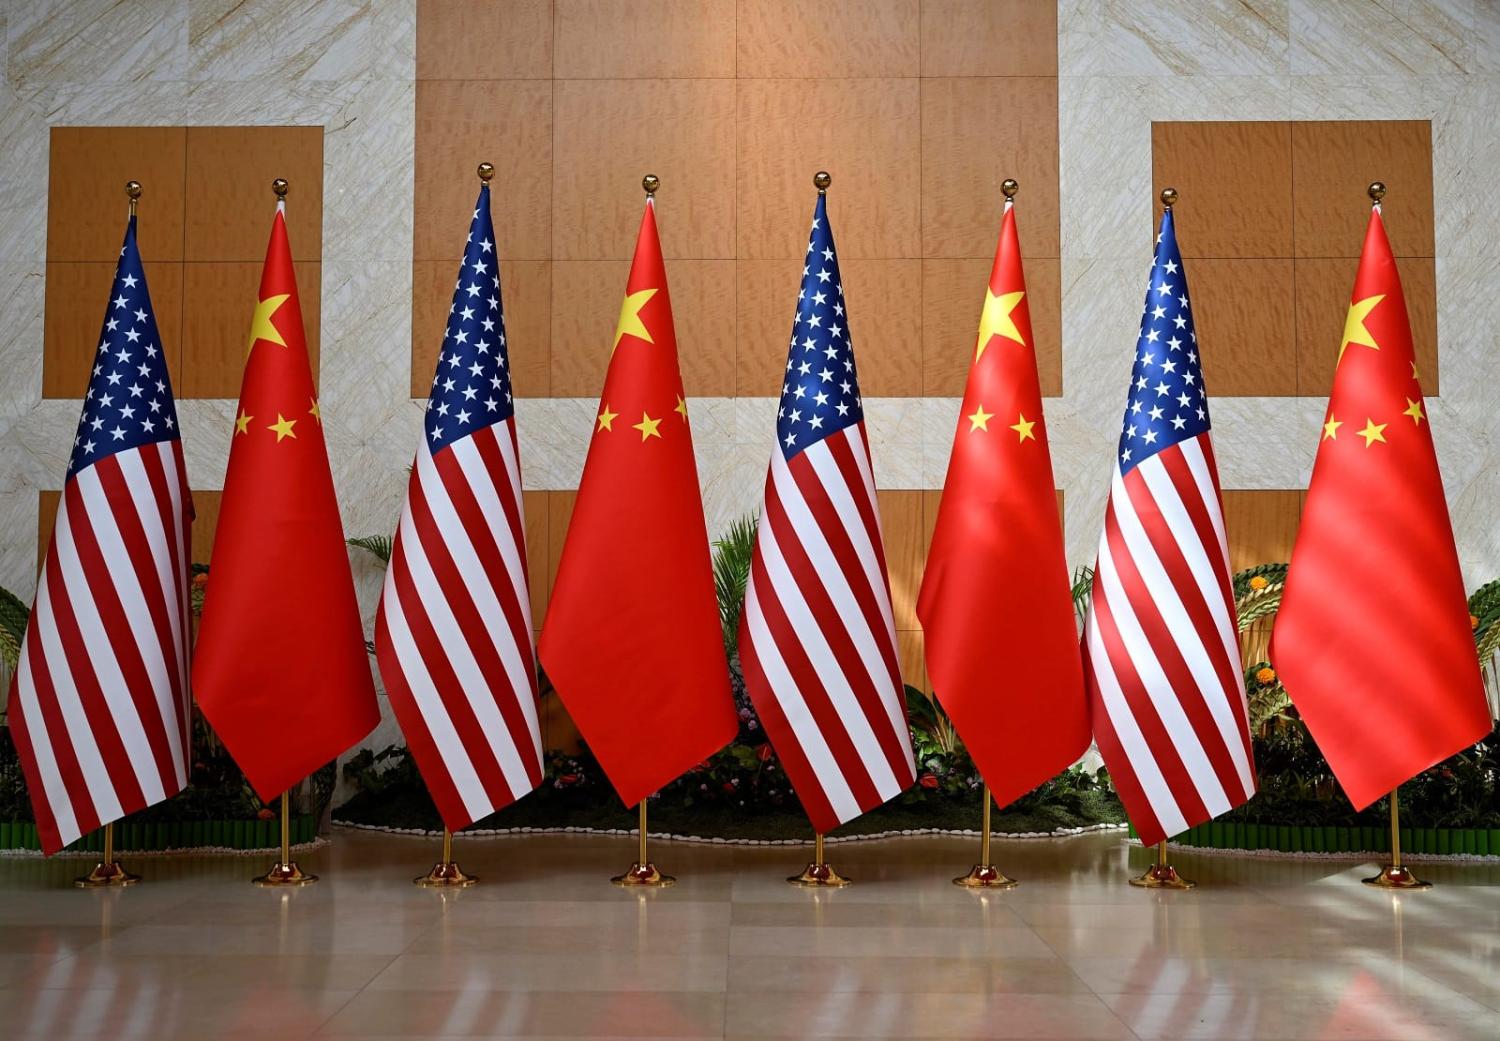 China’s policy towards the United States is becoming more confrontational (Xinhua via Getty Images)